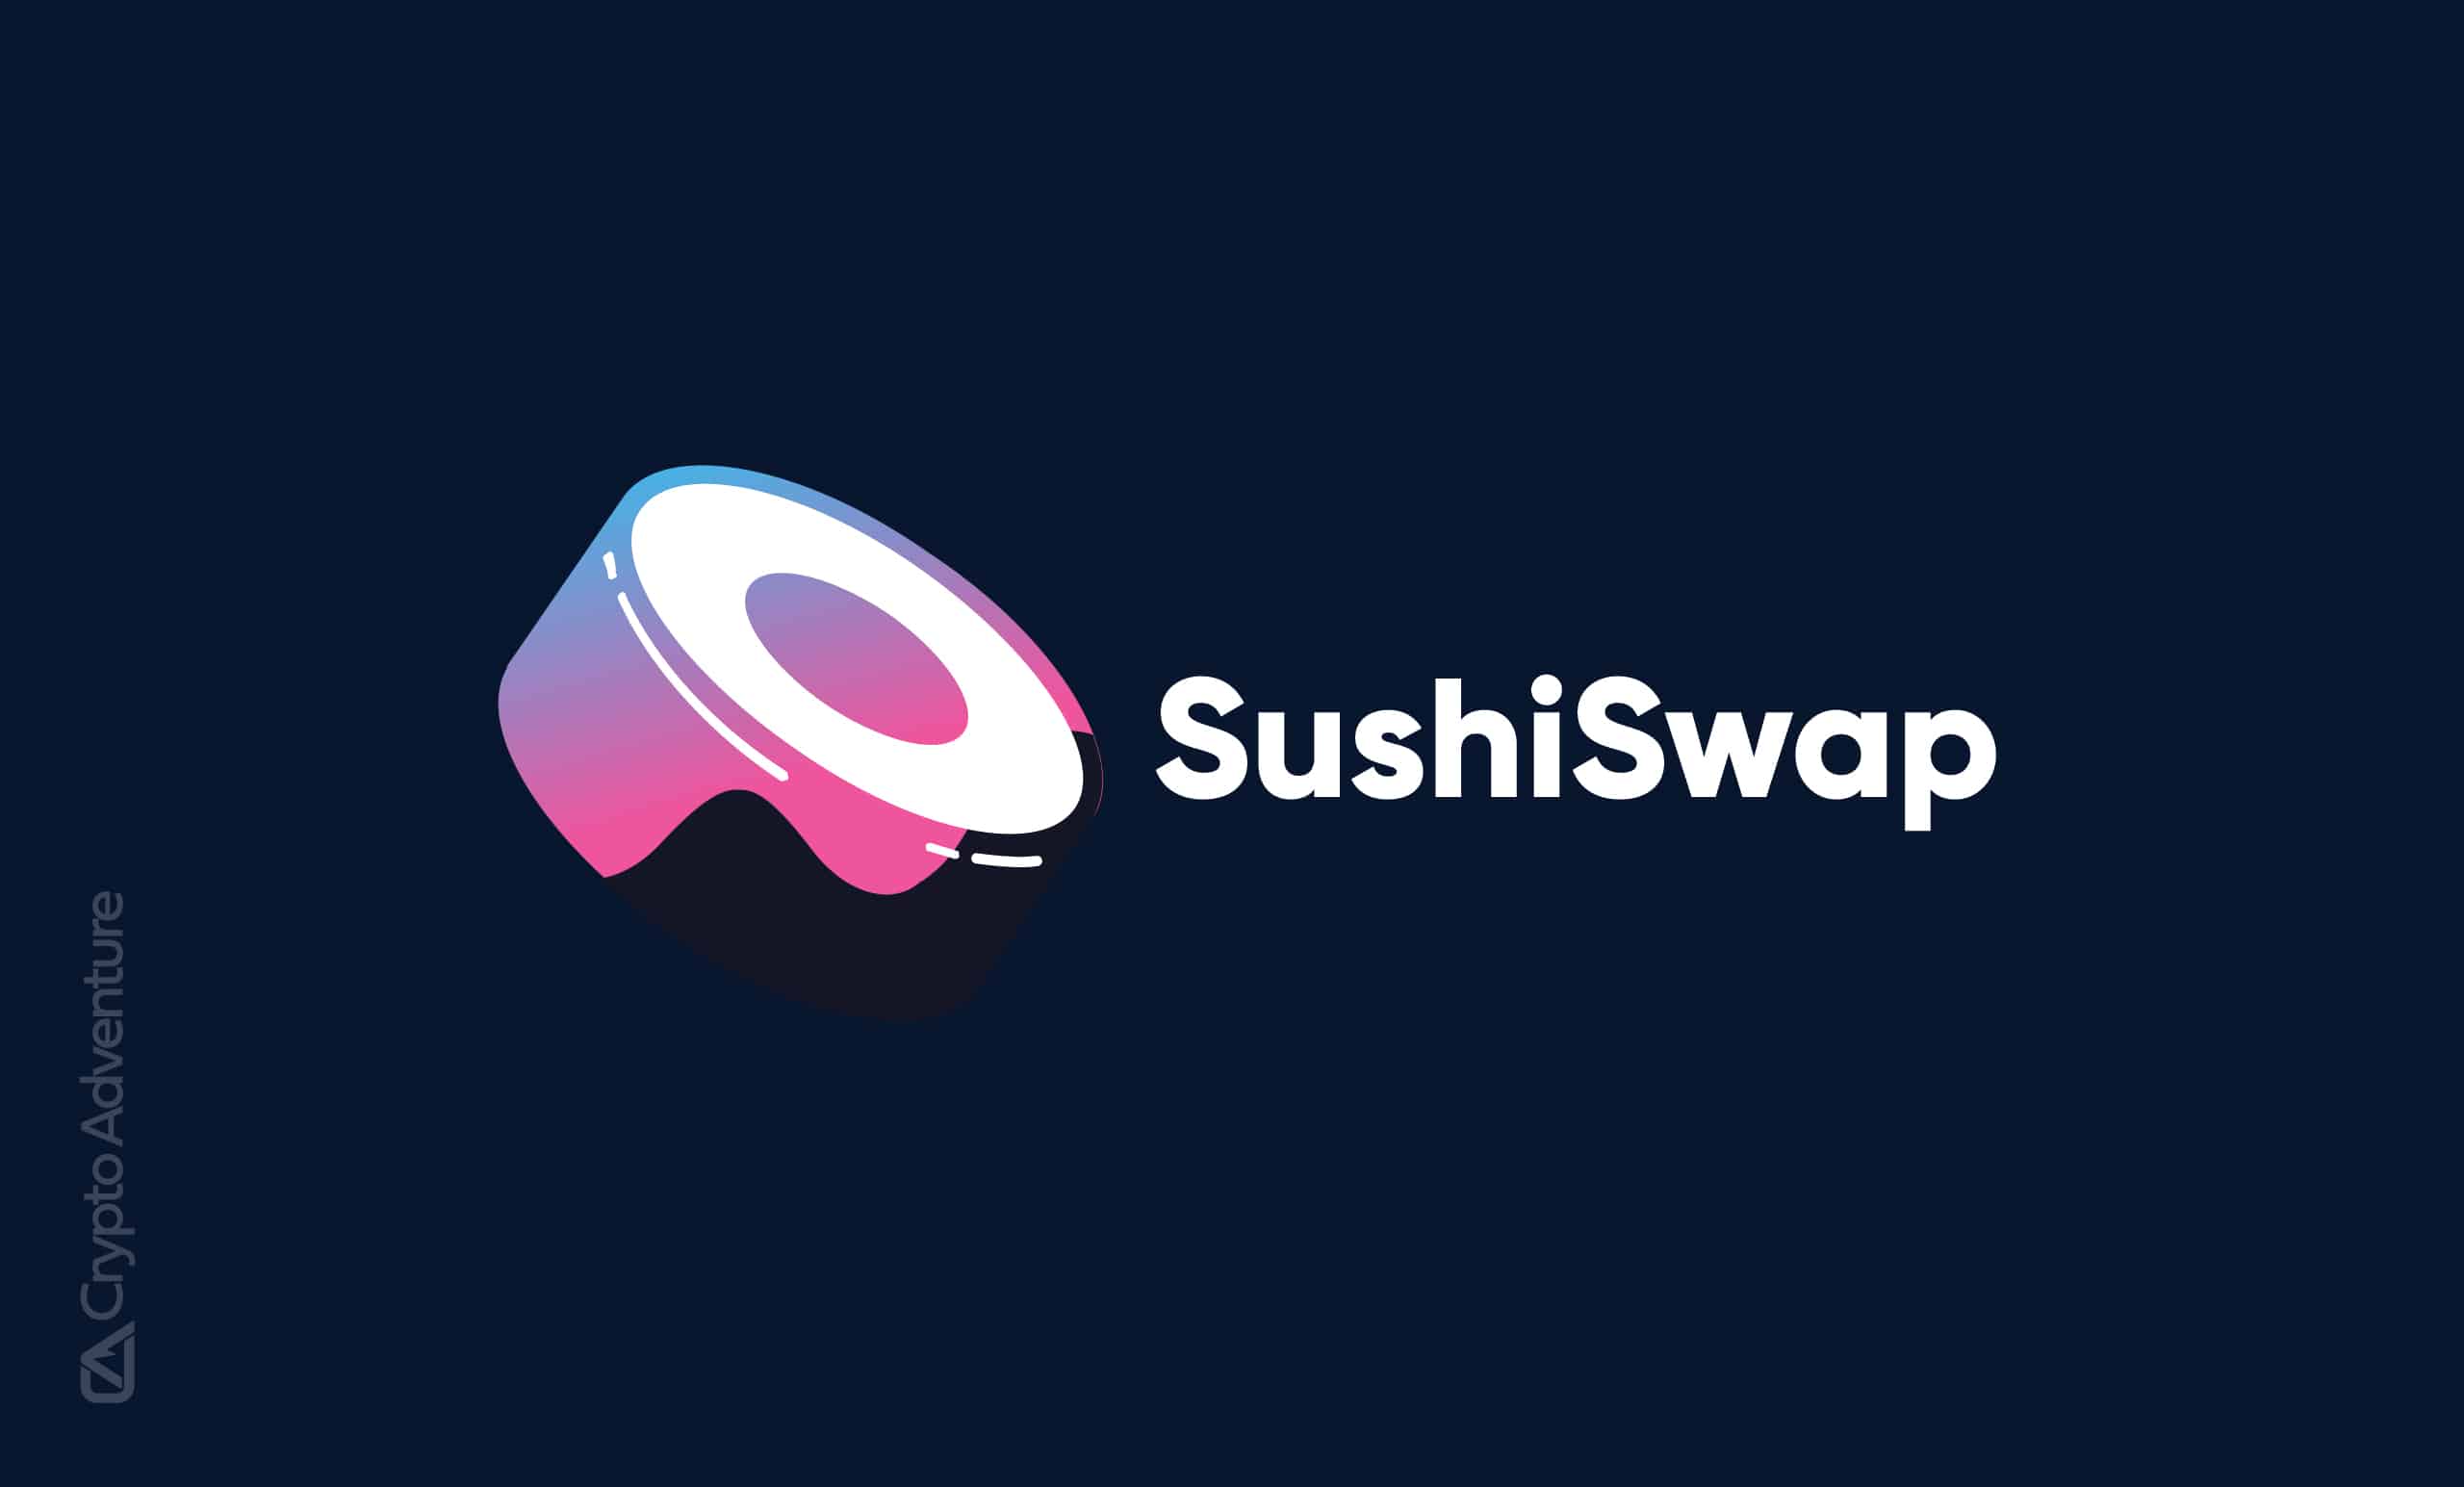 Sushiswap - CoinDesk